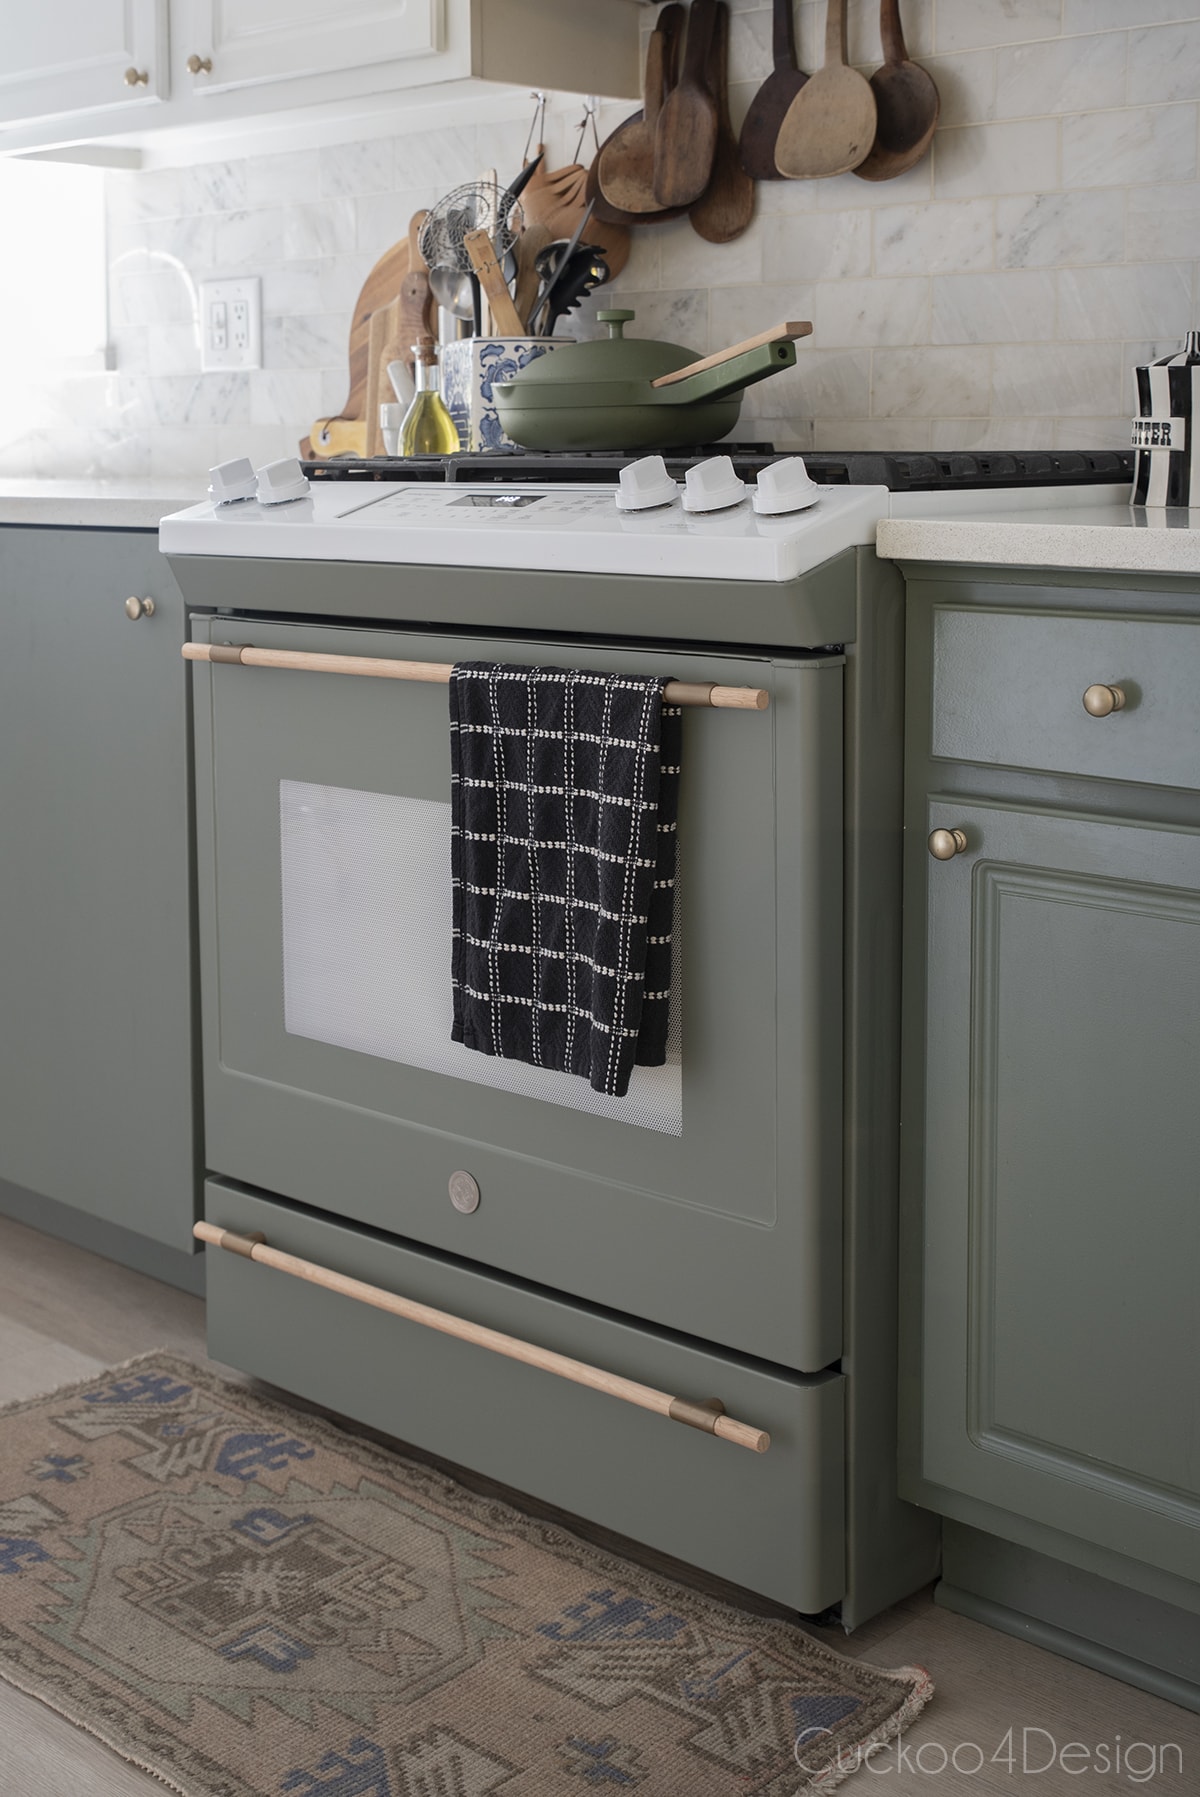 custom stove in dark sage green to match cabinets